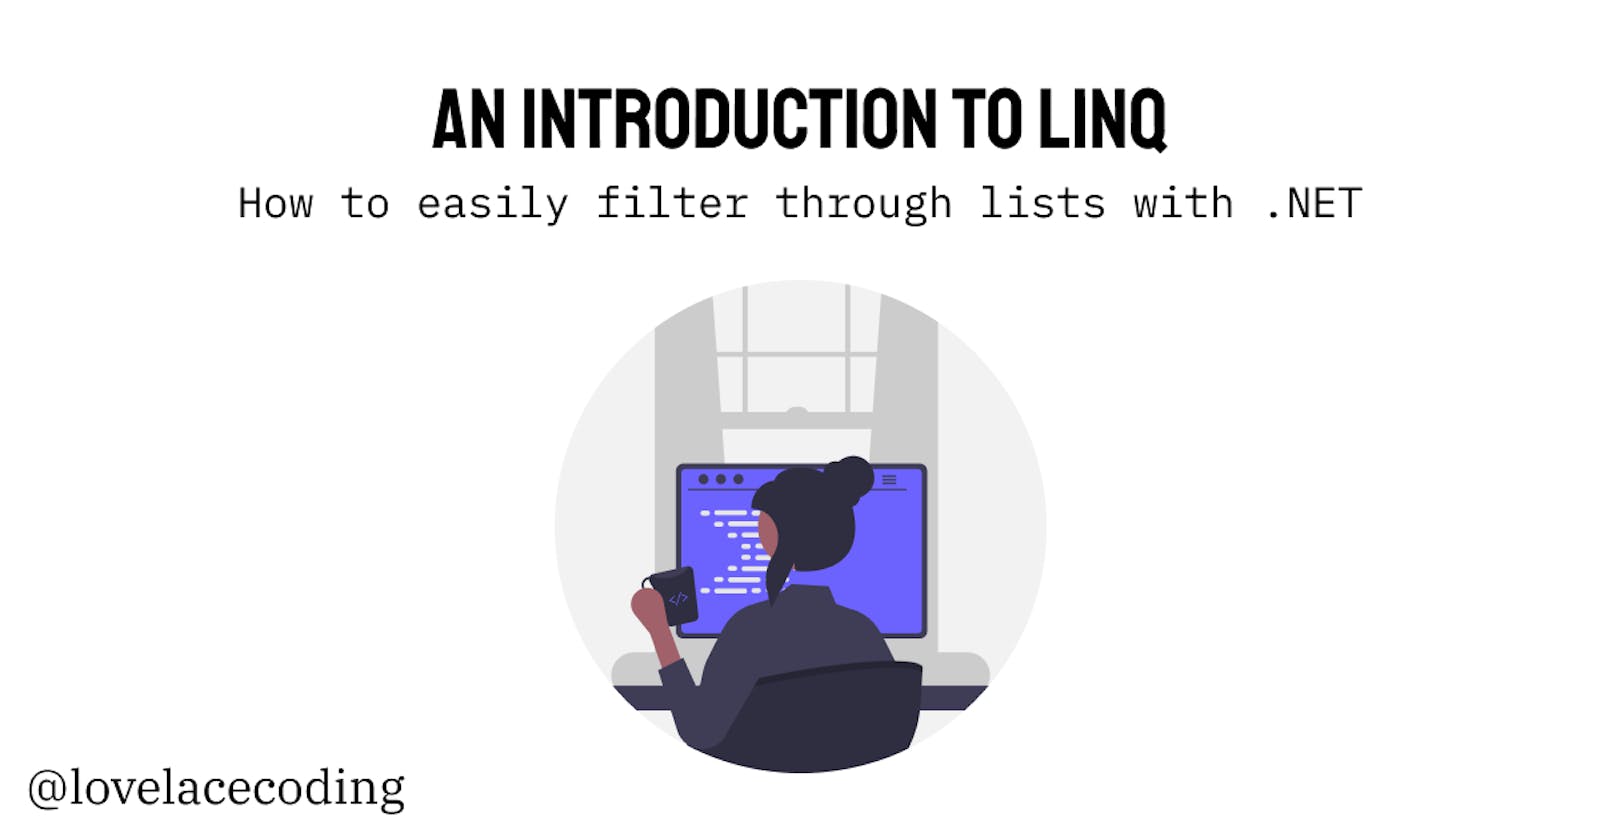 An Introduction to LINQ